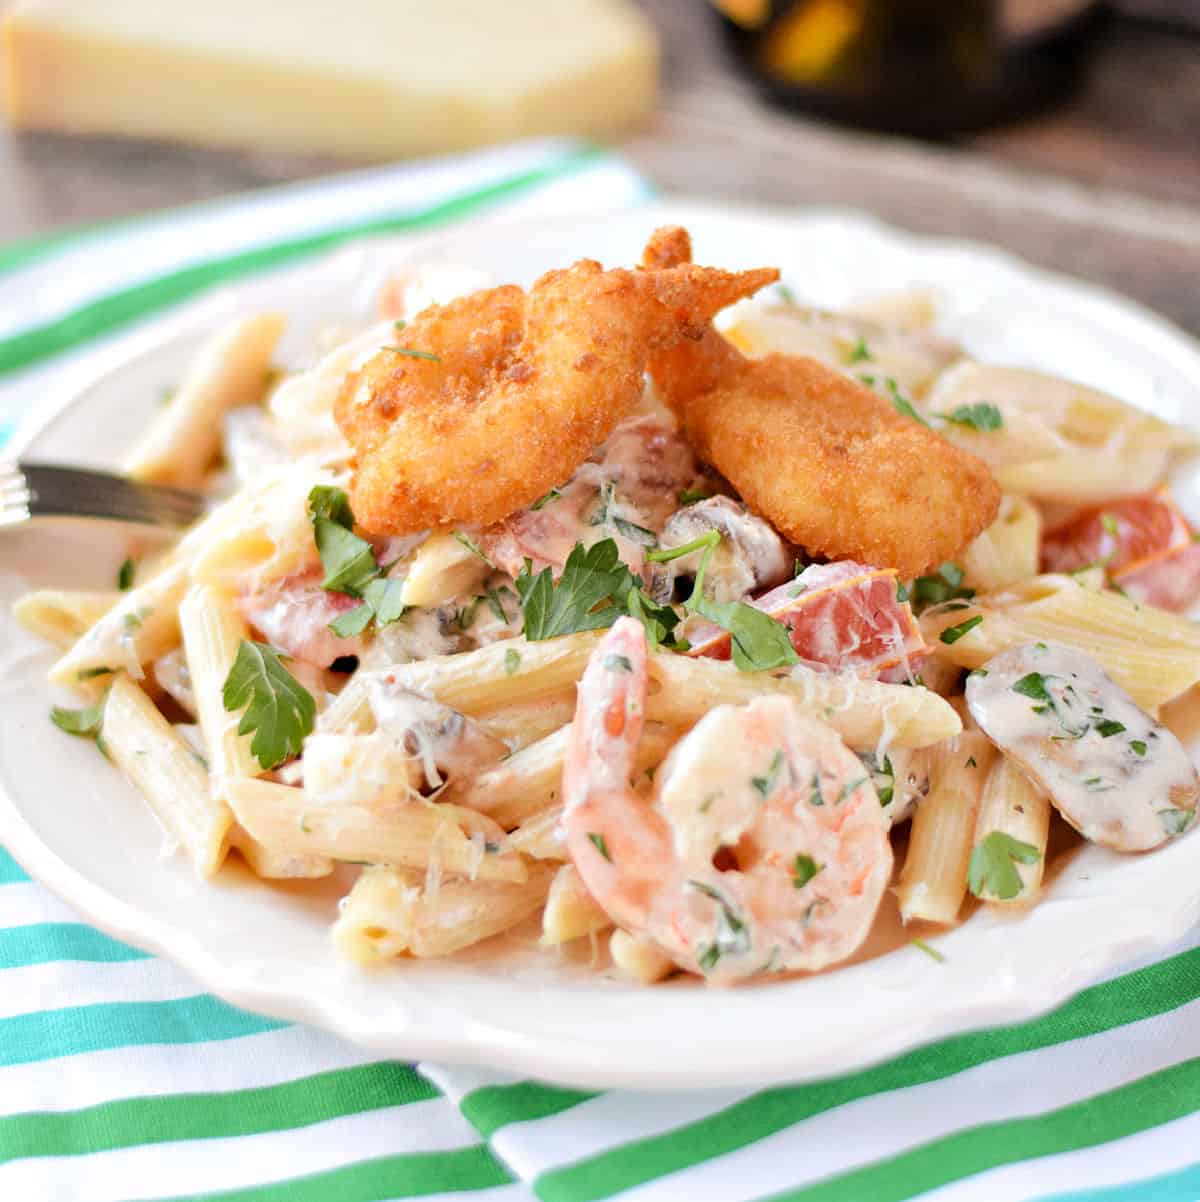 Penne pasta mixed with a creamy shrimp sauce, shrimp, mushrooms, tomatoes, and topped with three breaded shrimp on a white plate.